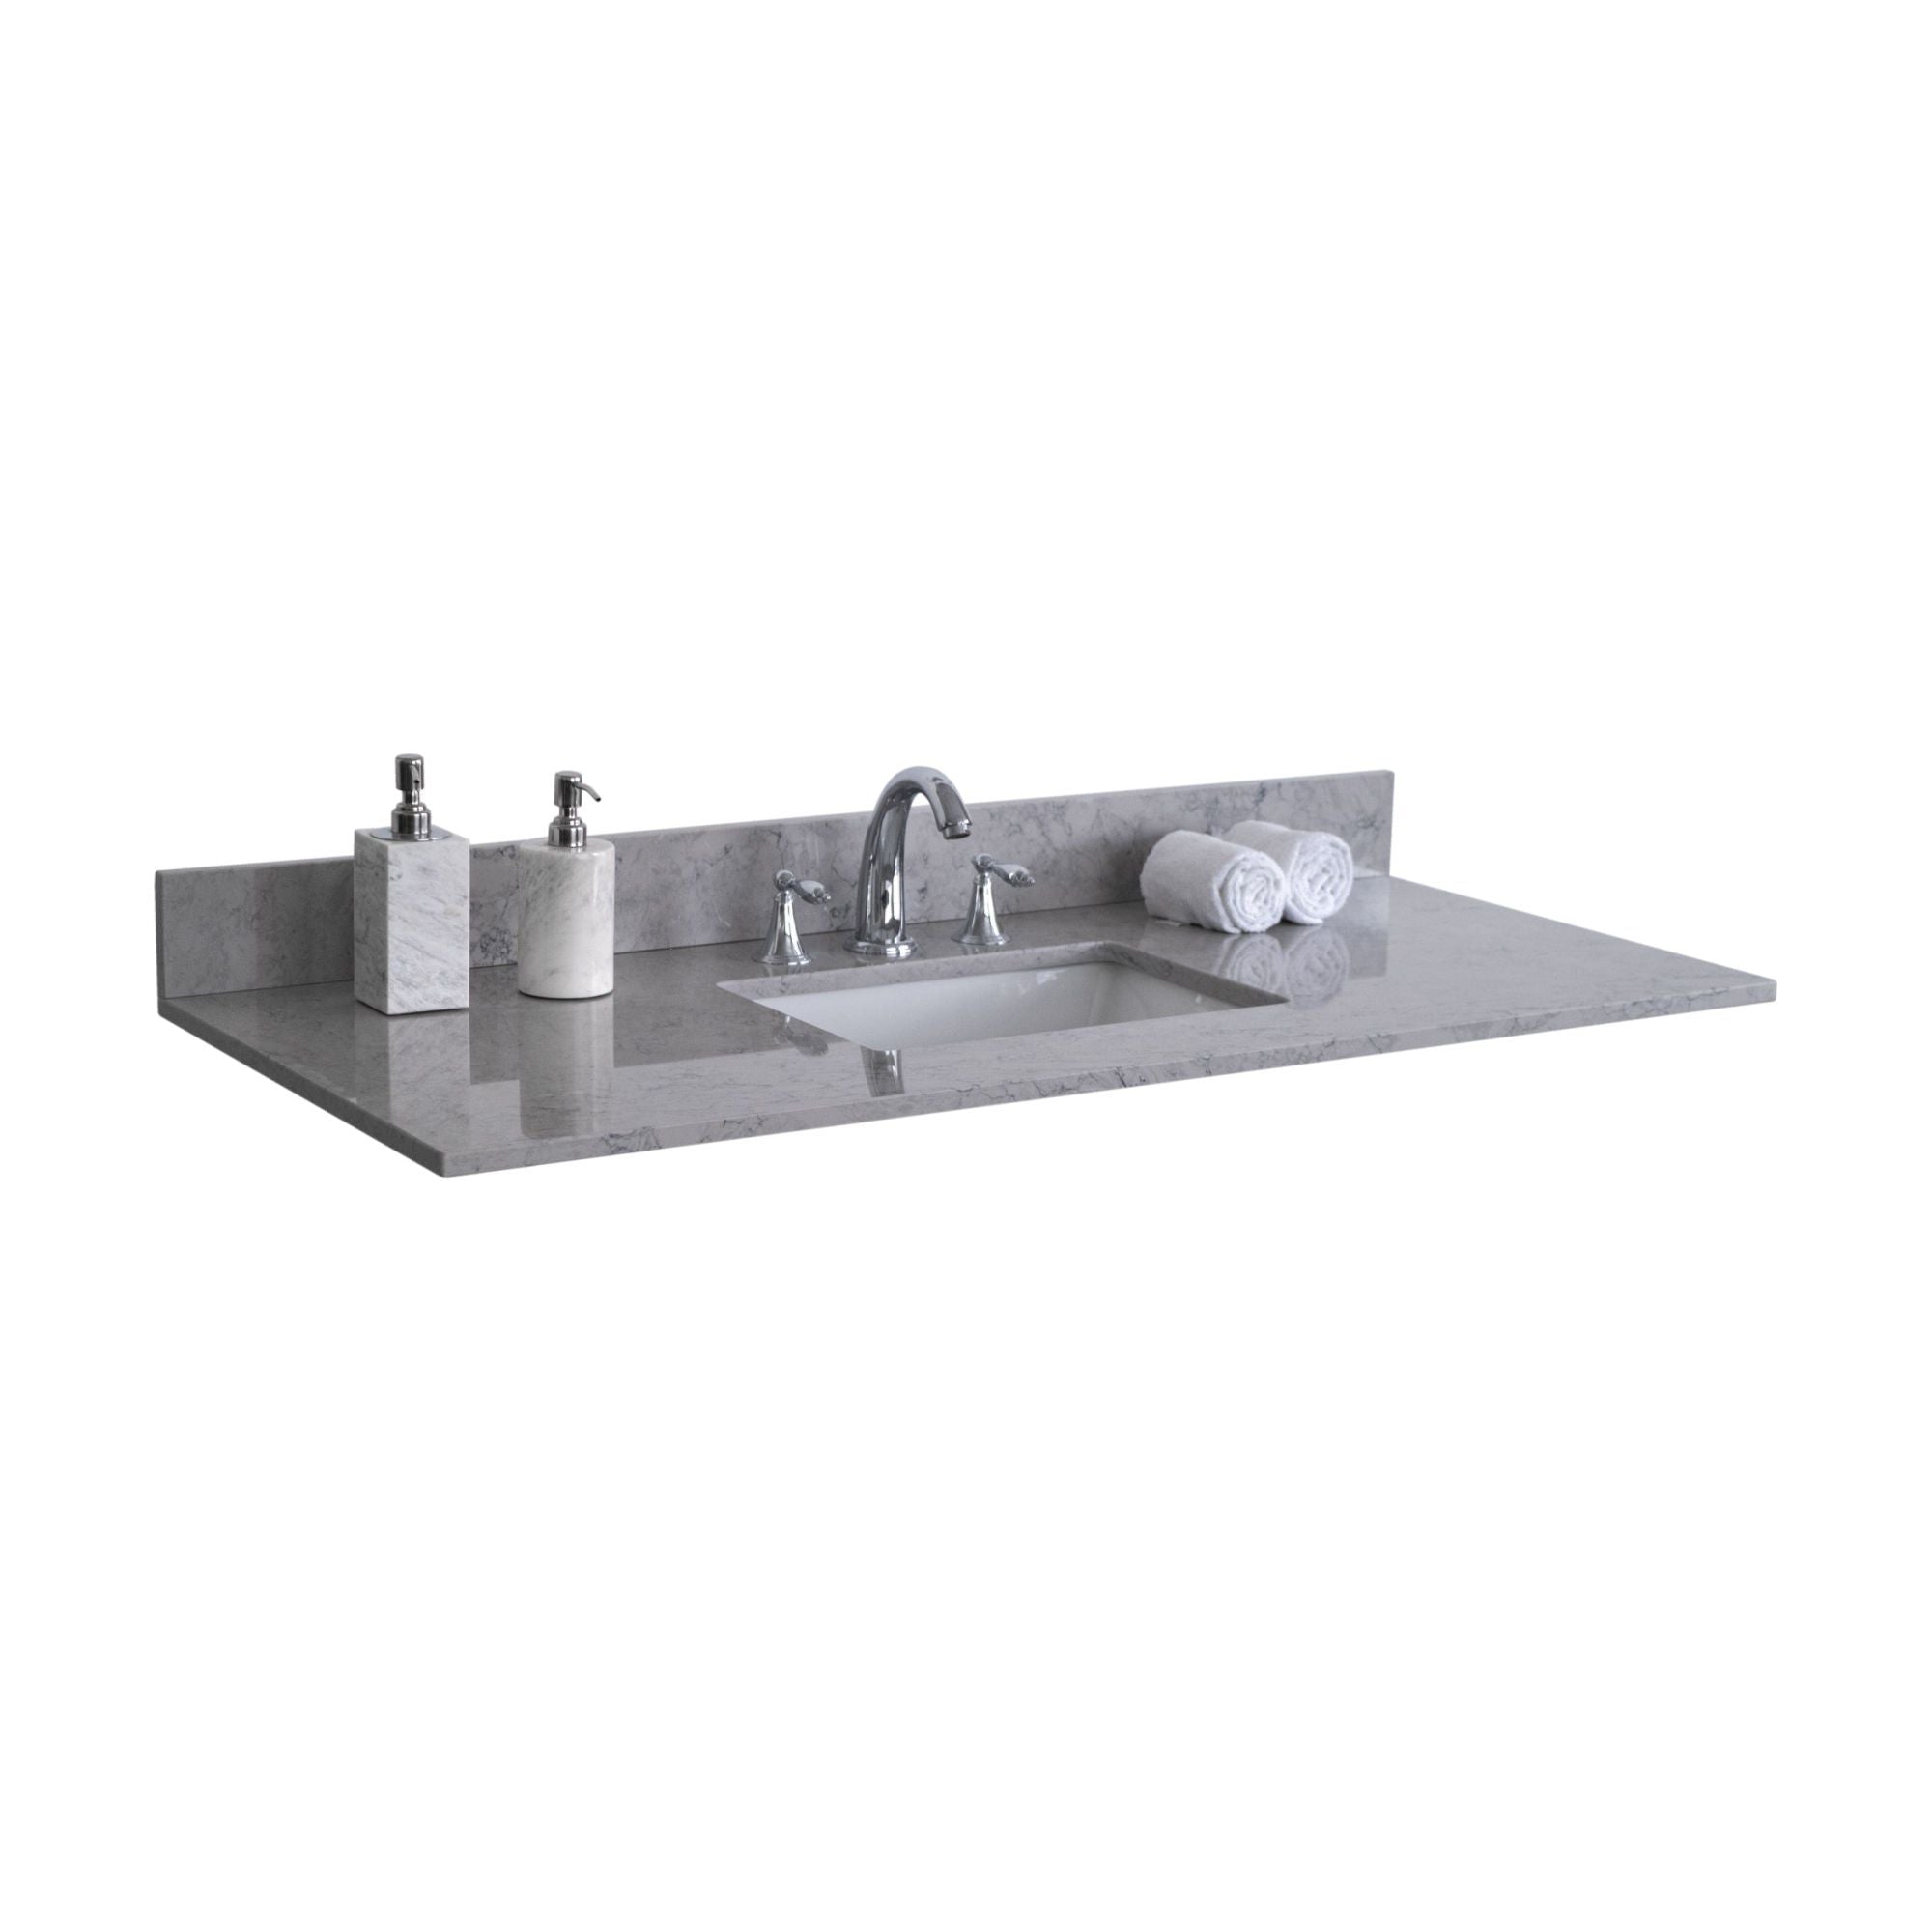 37 inches bathroom stone vanity top calacatta gray engineered marble color with undermount ceramic sink and 3 faucet hole with backsplash Moorescarts